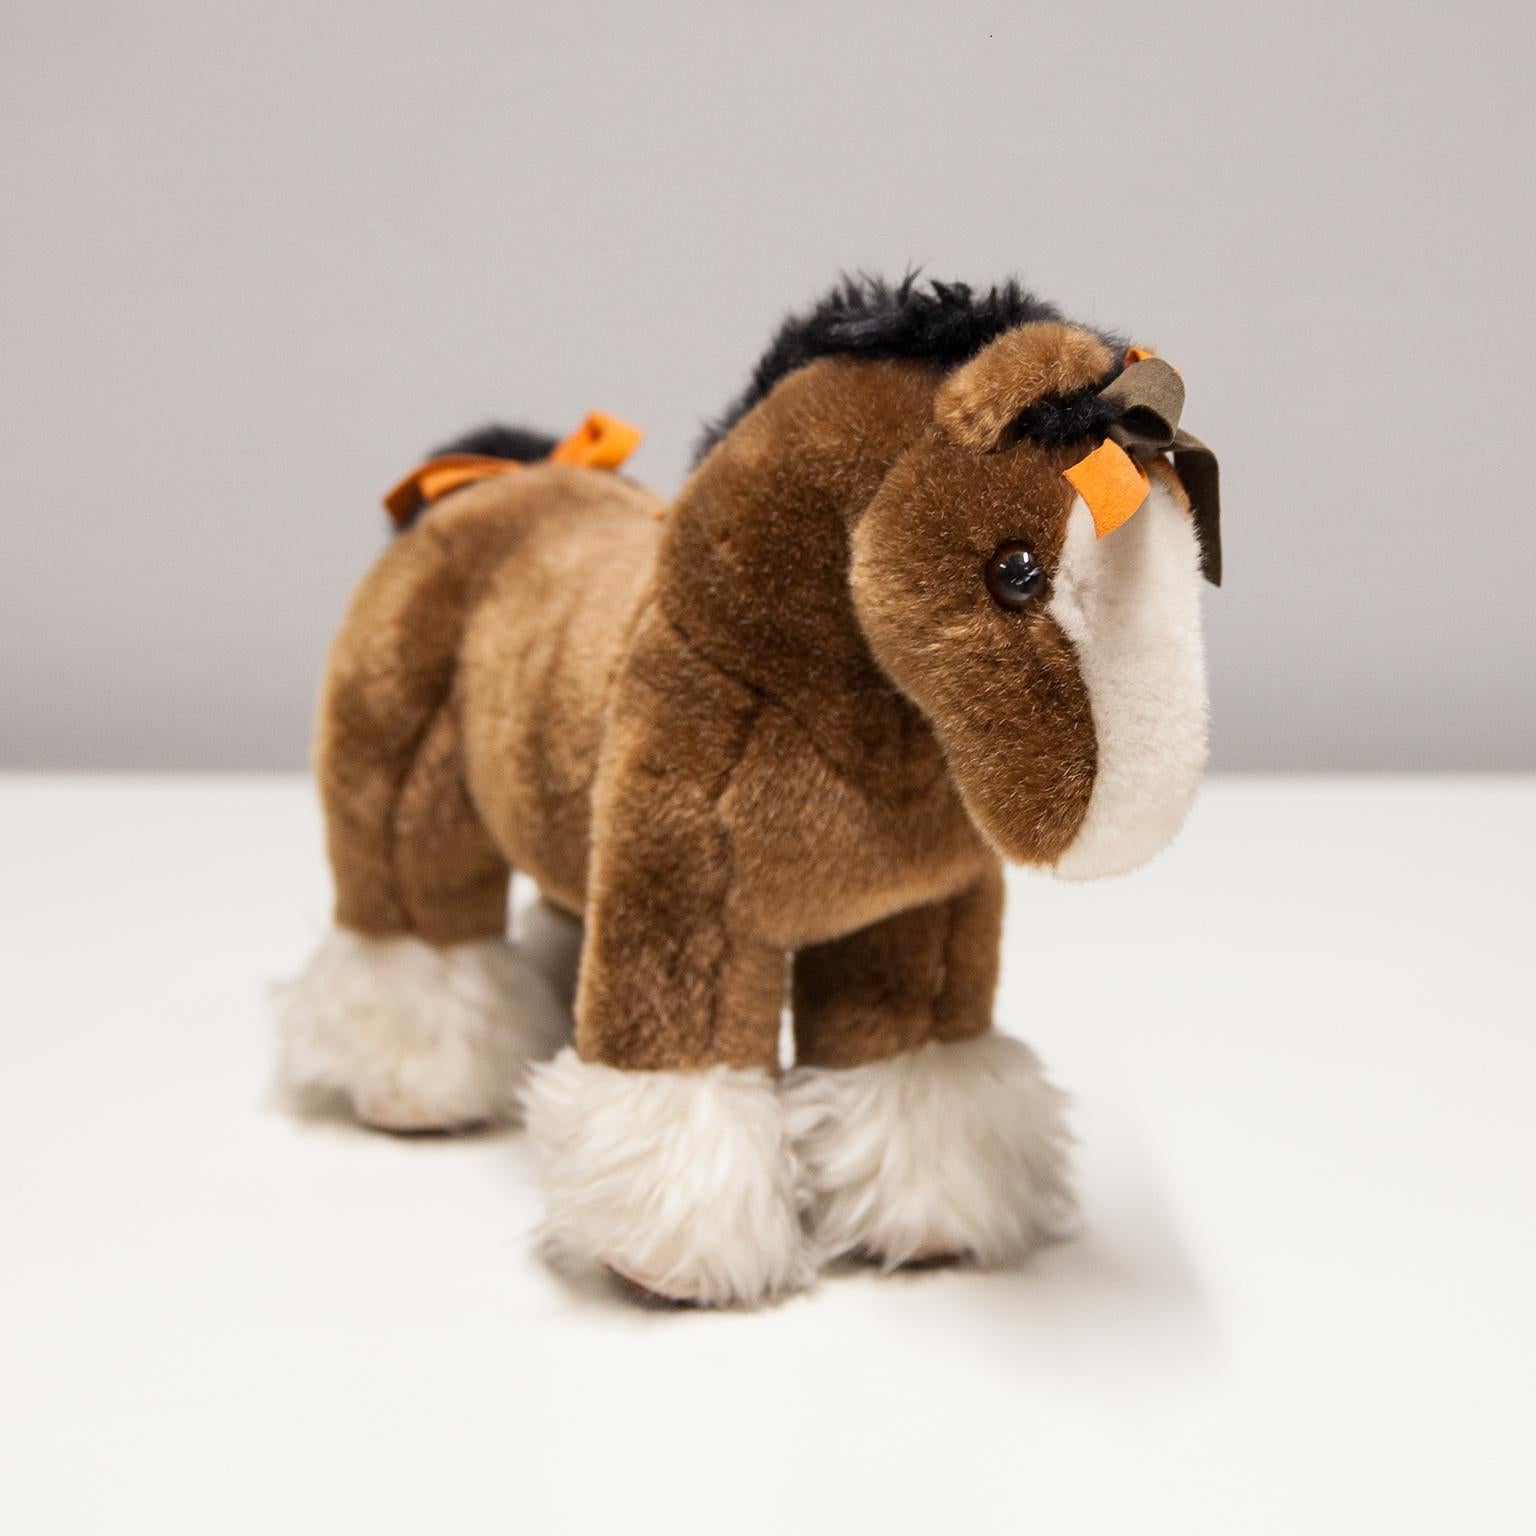 Hermes Hermy The Horse small plush toy 100% authentic. The outside is 100% acrylic, while the inside is 100% polyester, as shown on the label. The horse’s hair, in brown color, is very soft and in very good vintage condition.